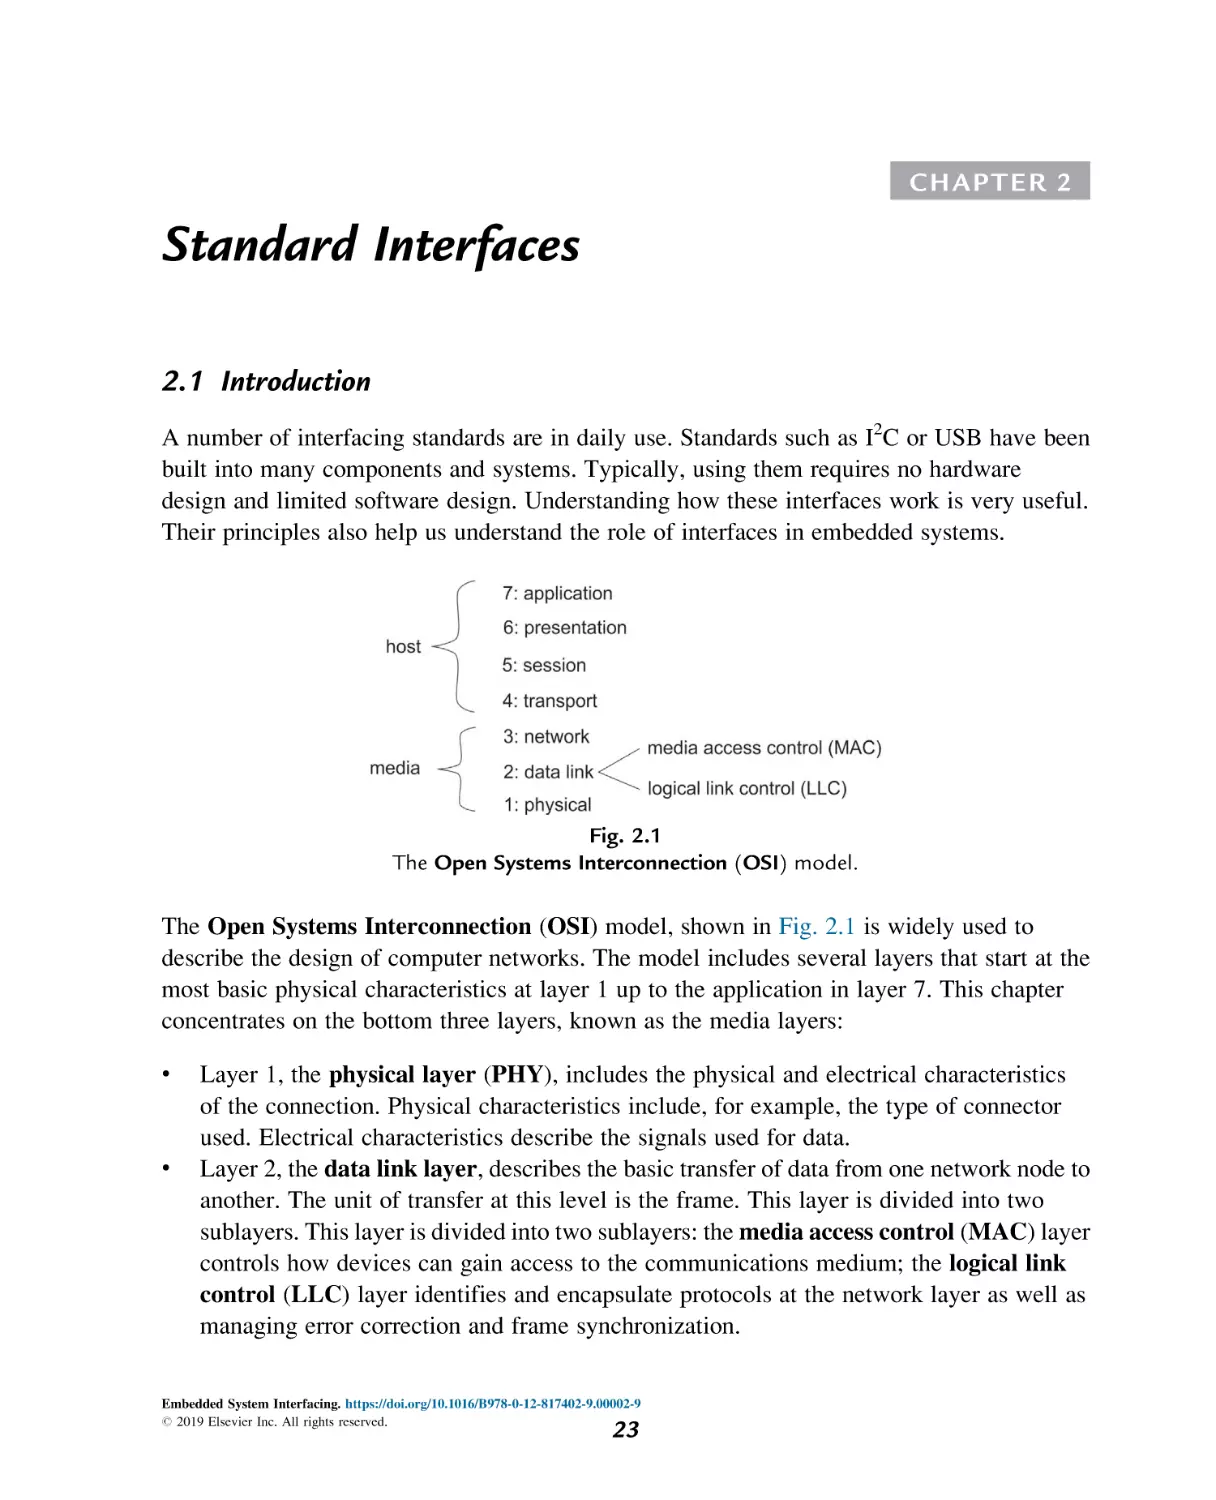 2
Standard Interfaces
Introduction